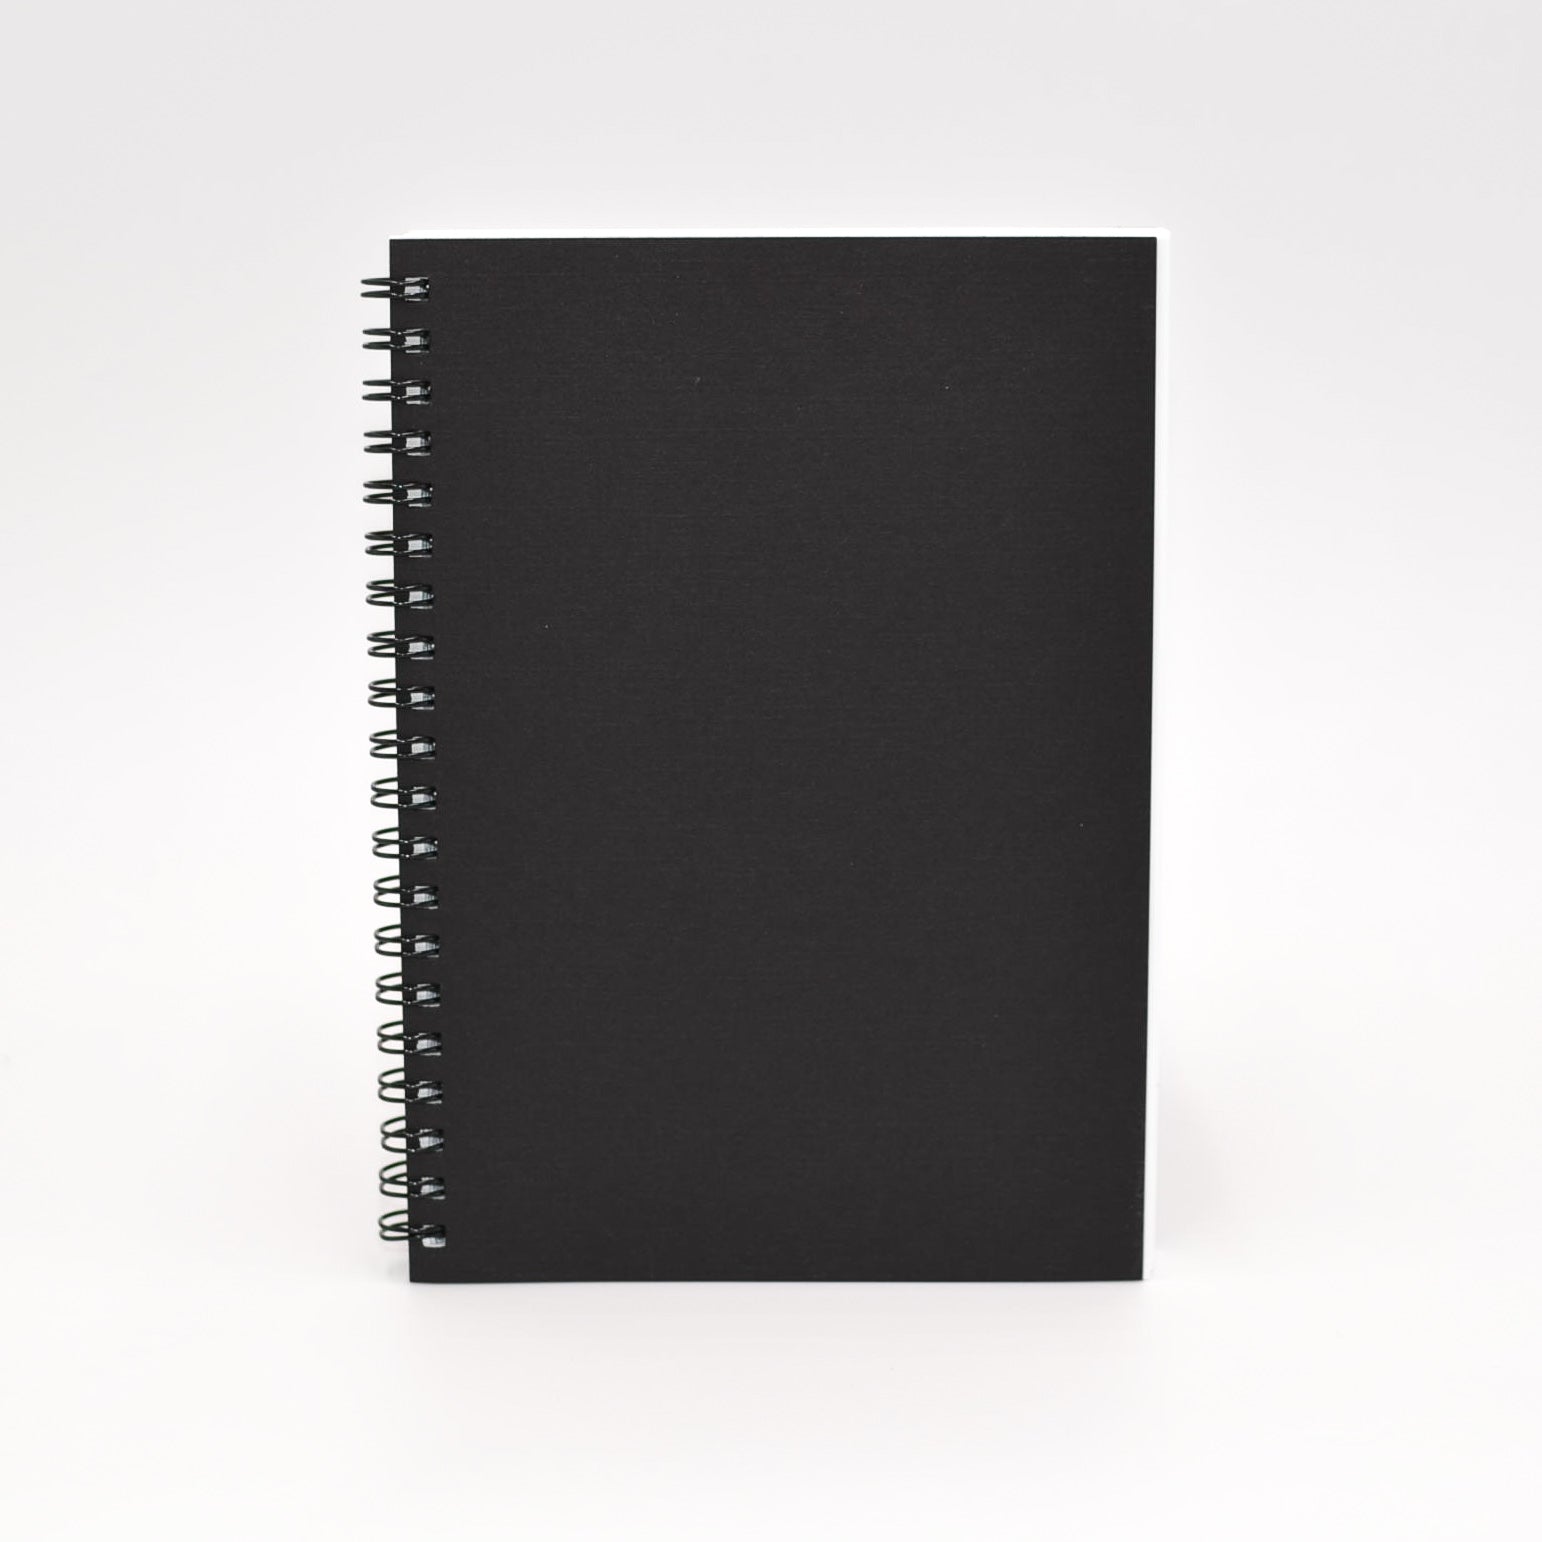 Journal Refill: 1271 Wirebound 5 x 7 Journals  Black or Sand cover, white paper. Gray-lined or blank sheets. Wire-bound refill. Back to journal refill makes for easy insertion into your cover.